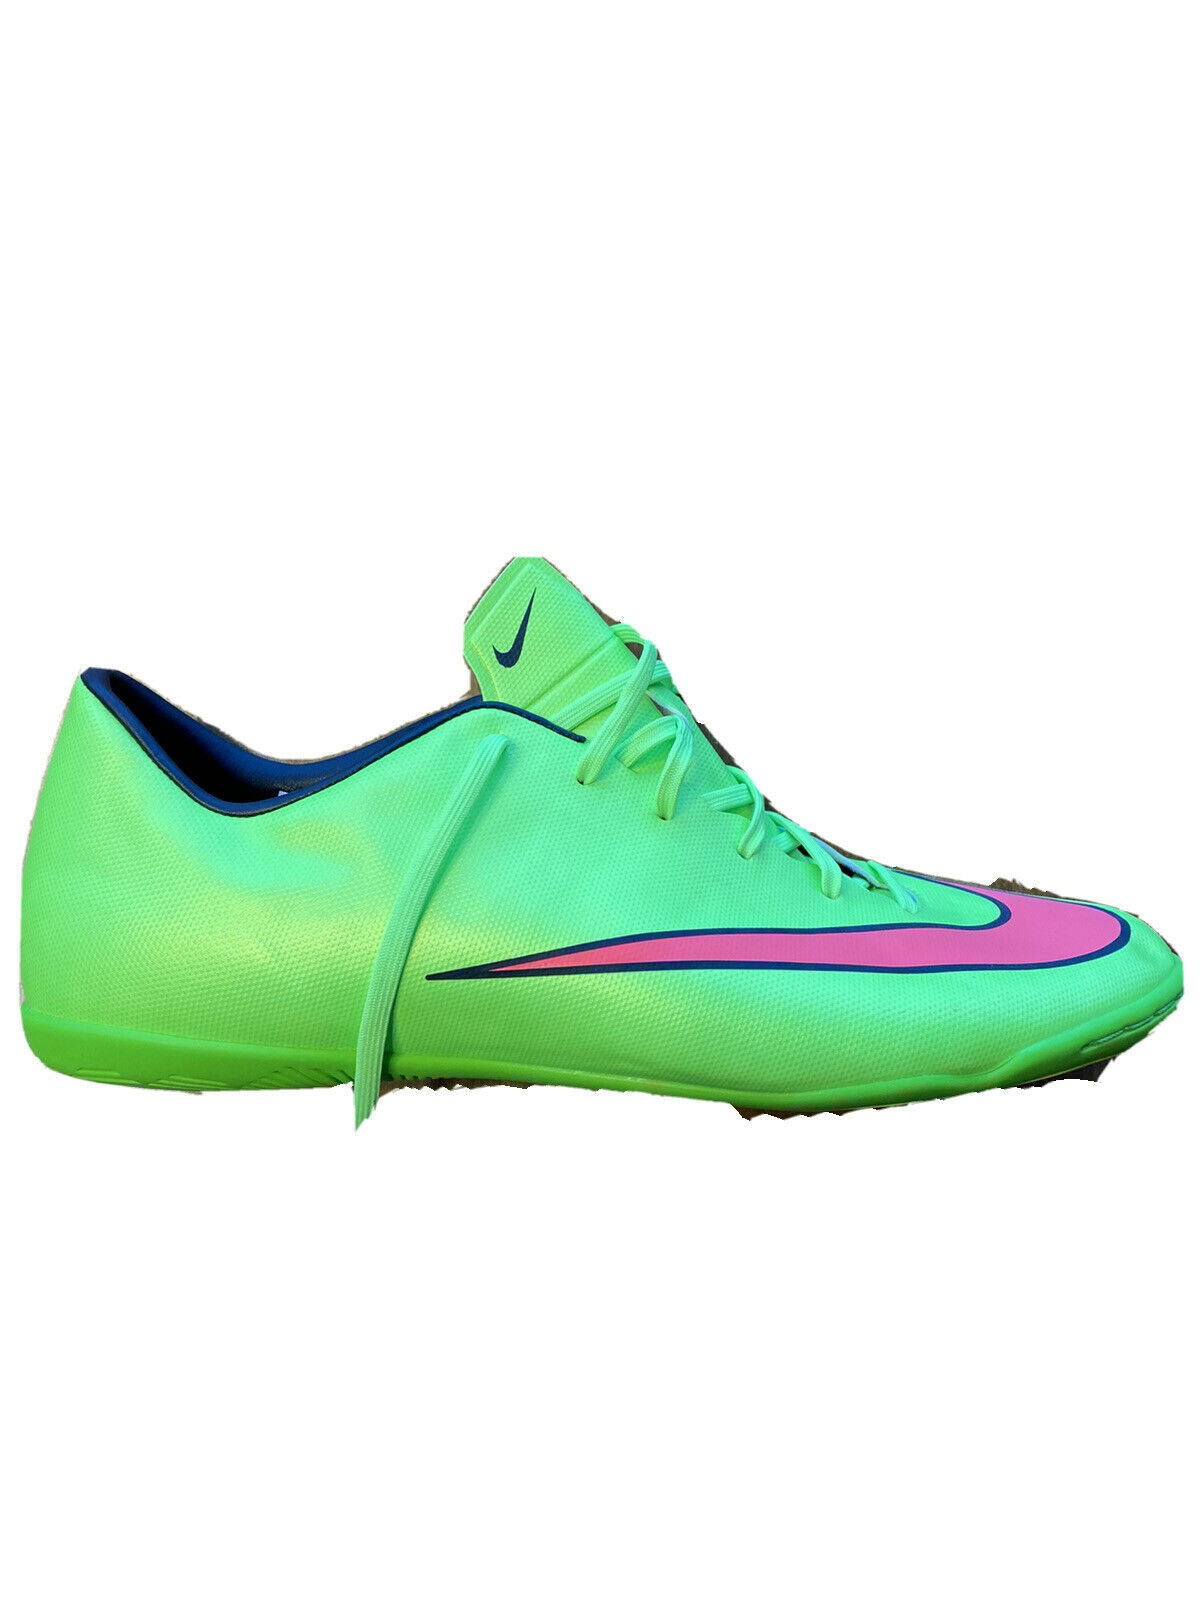 Nike Mens Size 12 Mercurial Victory V IC 651635 360 Green Indoor Soccer Shoes